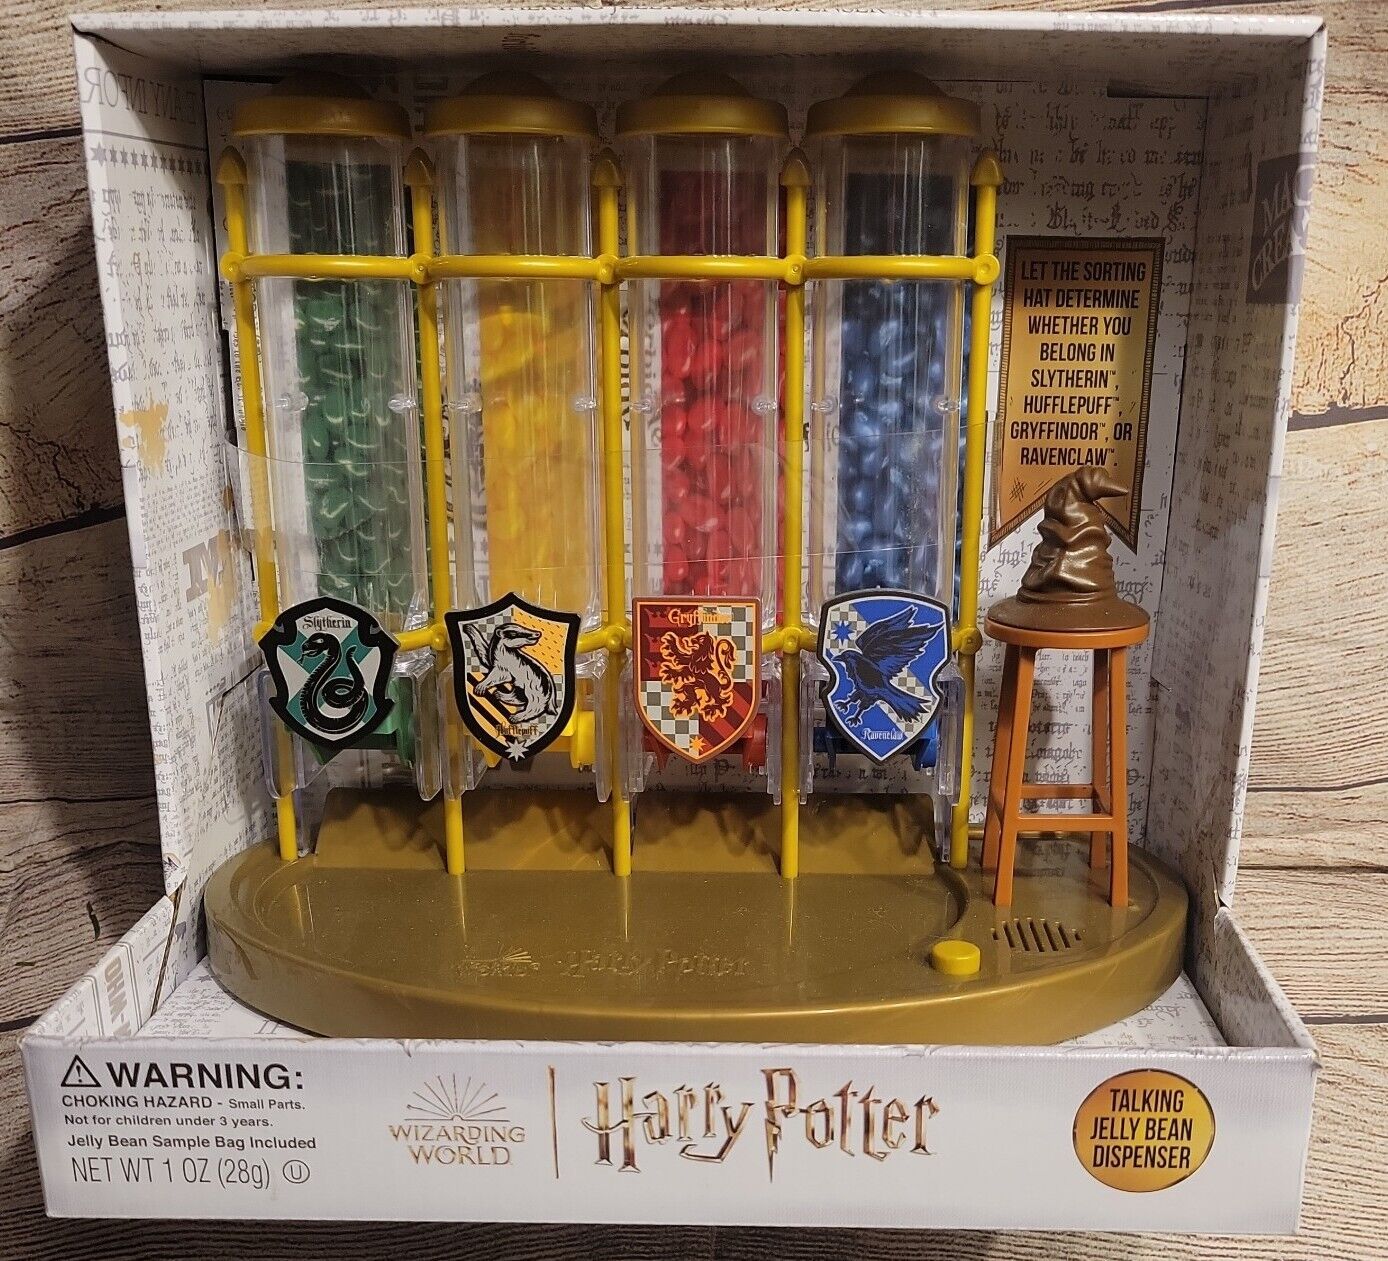 Jelly Belly House Points Dispensor, Hogwarts Sorting Hat, Harry Potter Wizarding